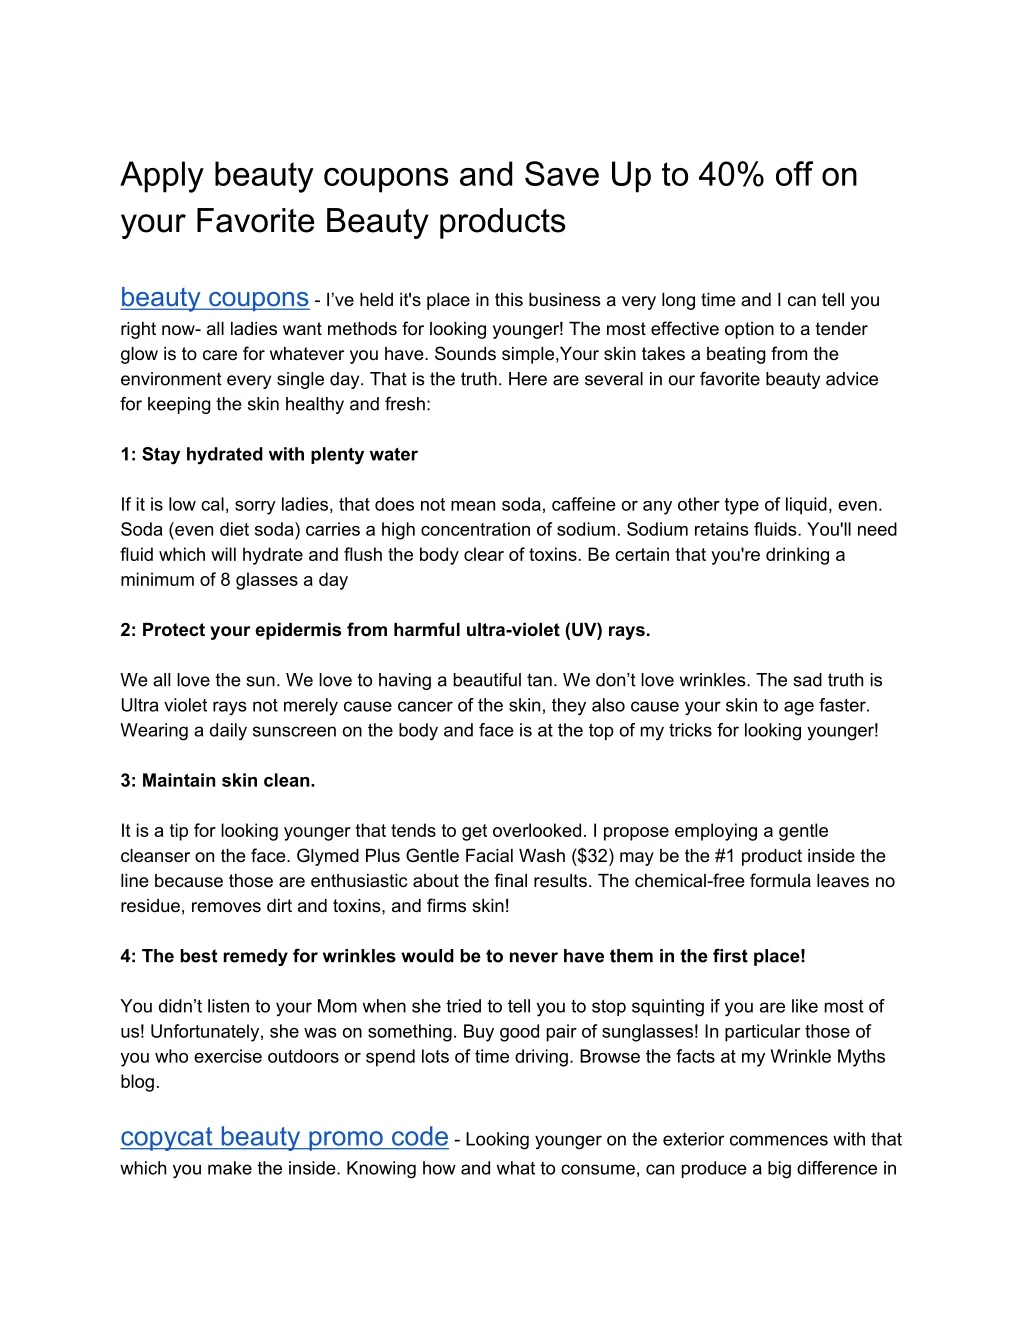 apply beauty coupons and save